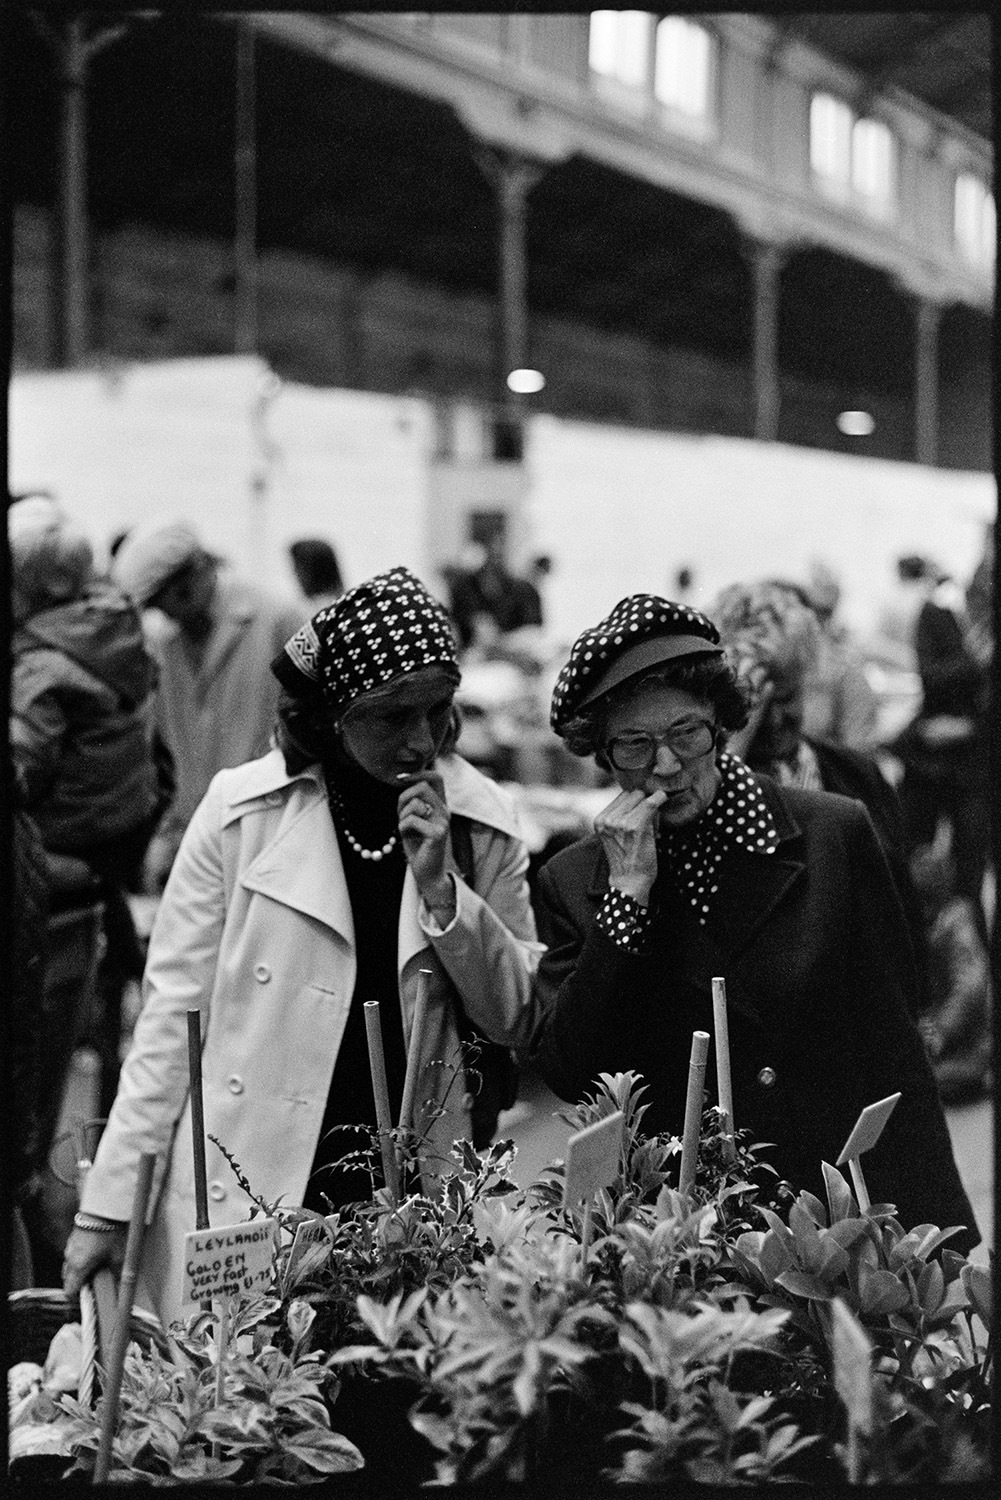 Market hall with stalls, fruit, vegetables and flowers, customers. 
[Two women looking at plants and flowers on a stall at South Molton Pannier Market. One woman is wearing a hat and the other is wearing a head scarf.]